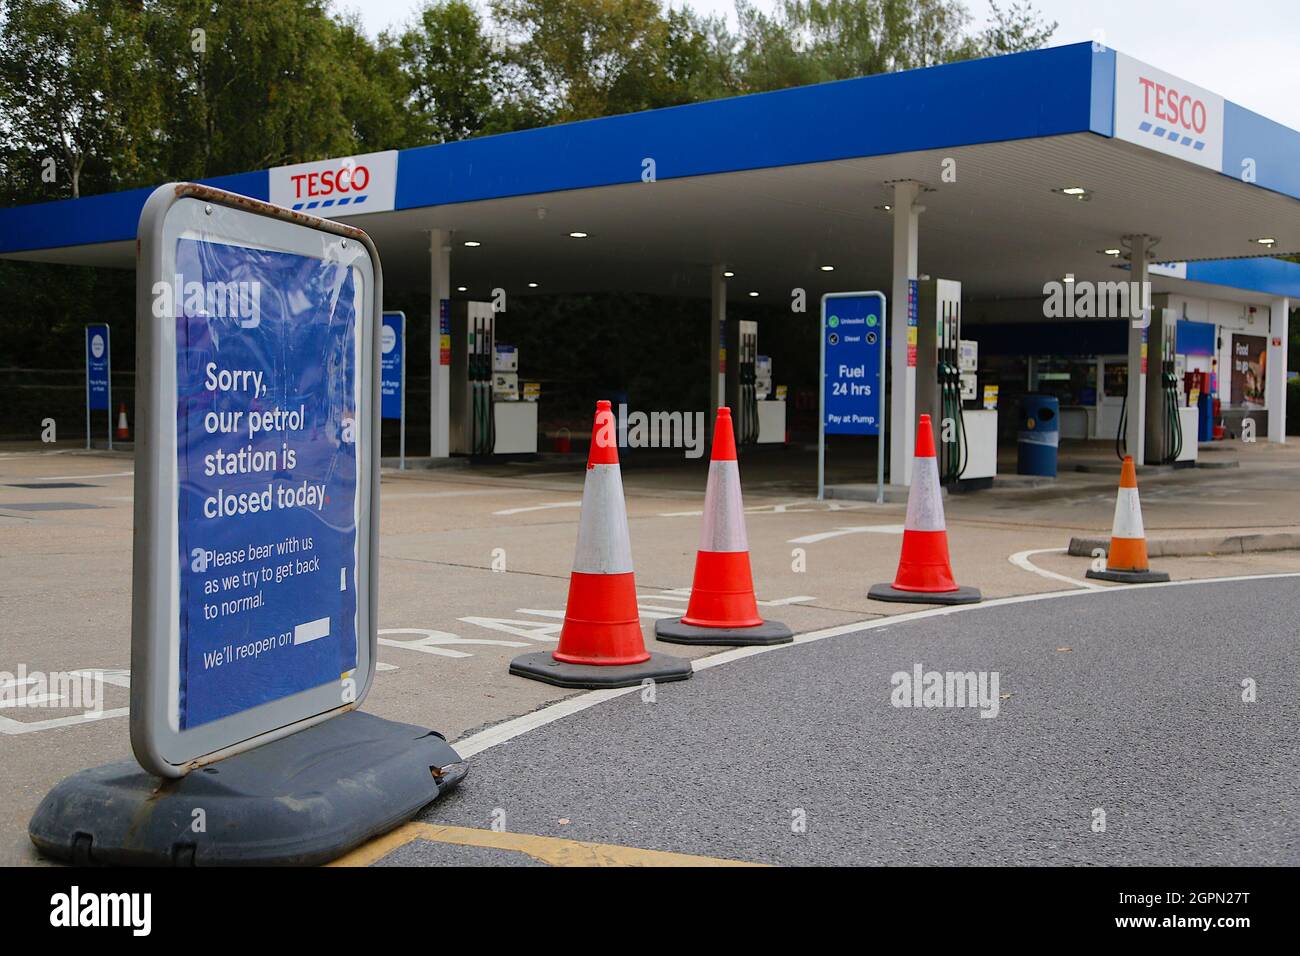 Ashford, Kent, UK. 30 September, 2021. Fuel shortages affecting petrol stations in Ashford, Kent. Closed Tesco petrol station due to shortage of fuel at the pumps. Sign with sorry our petrol station is closed today. Photo Credit: Paul Lawrenson /Alamy Live News Stock Photo